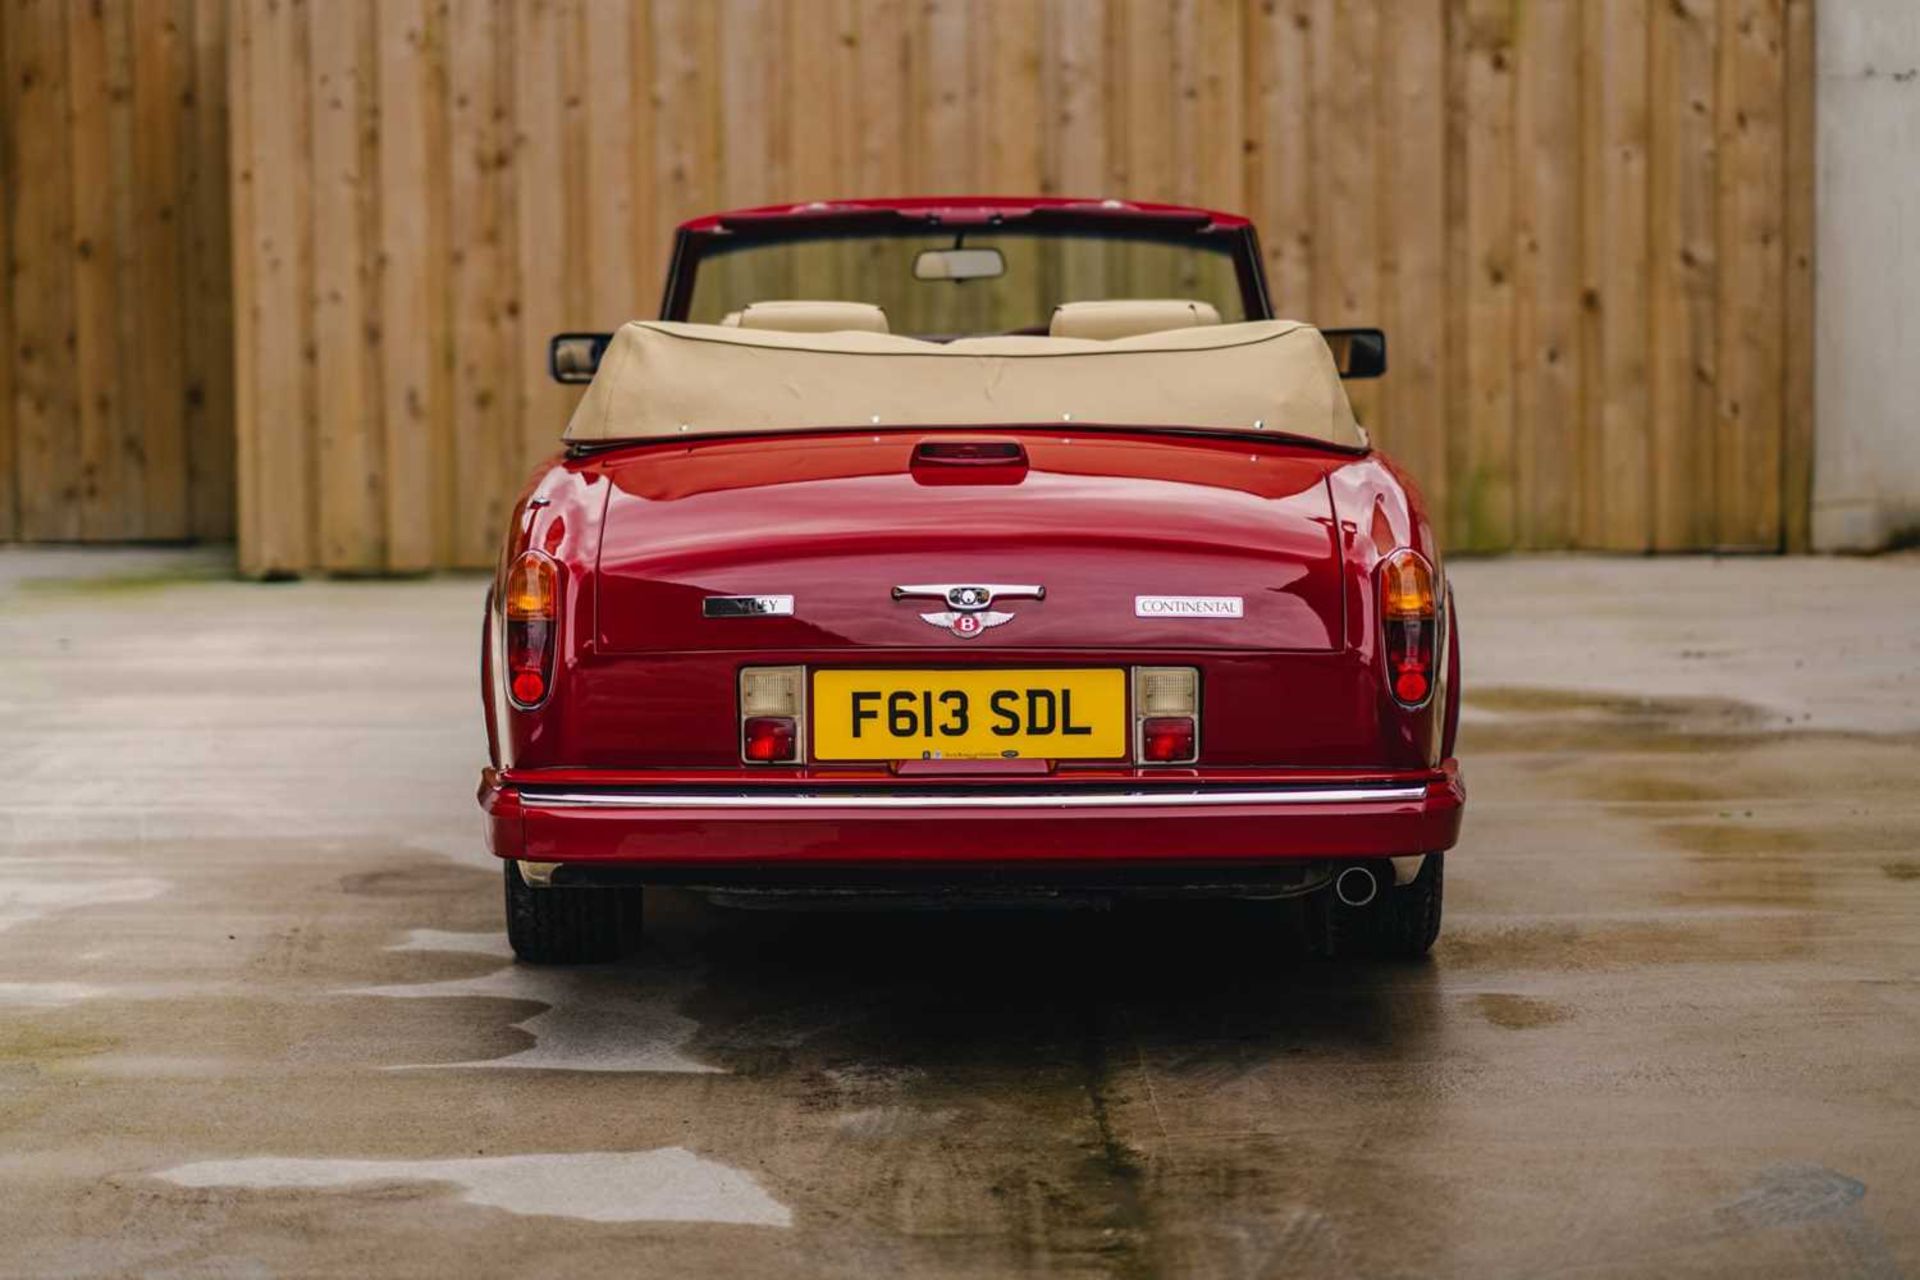 1989 Bentley Continental Convertible Meticulously maintained and boasts desirable factory options su - Image 10 of 71